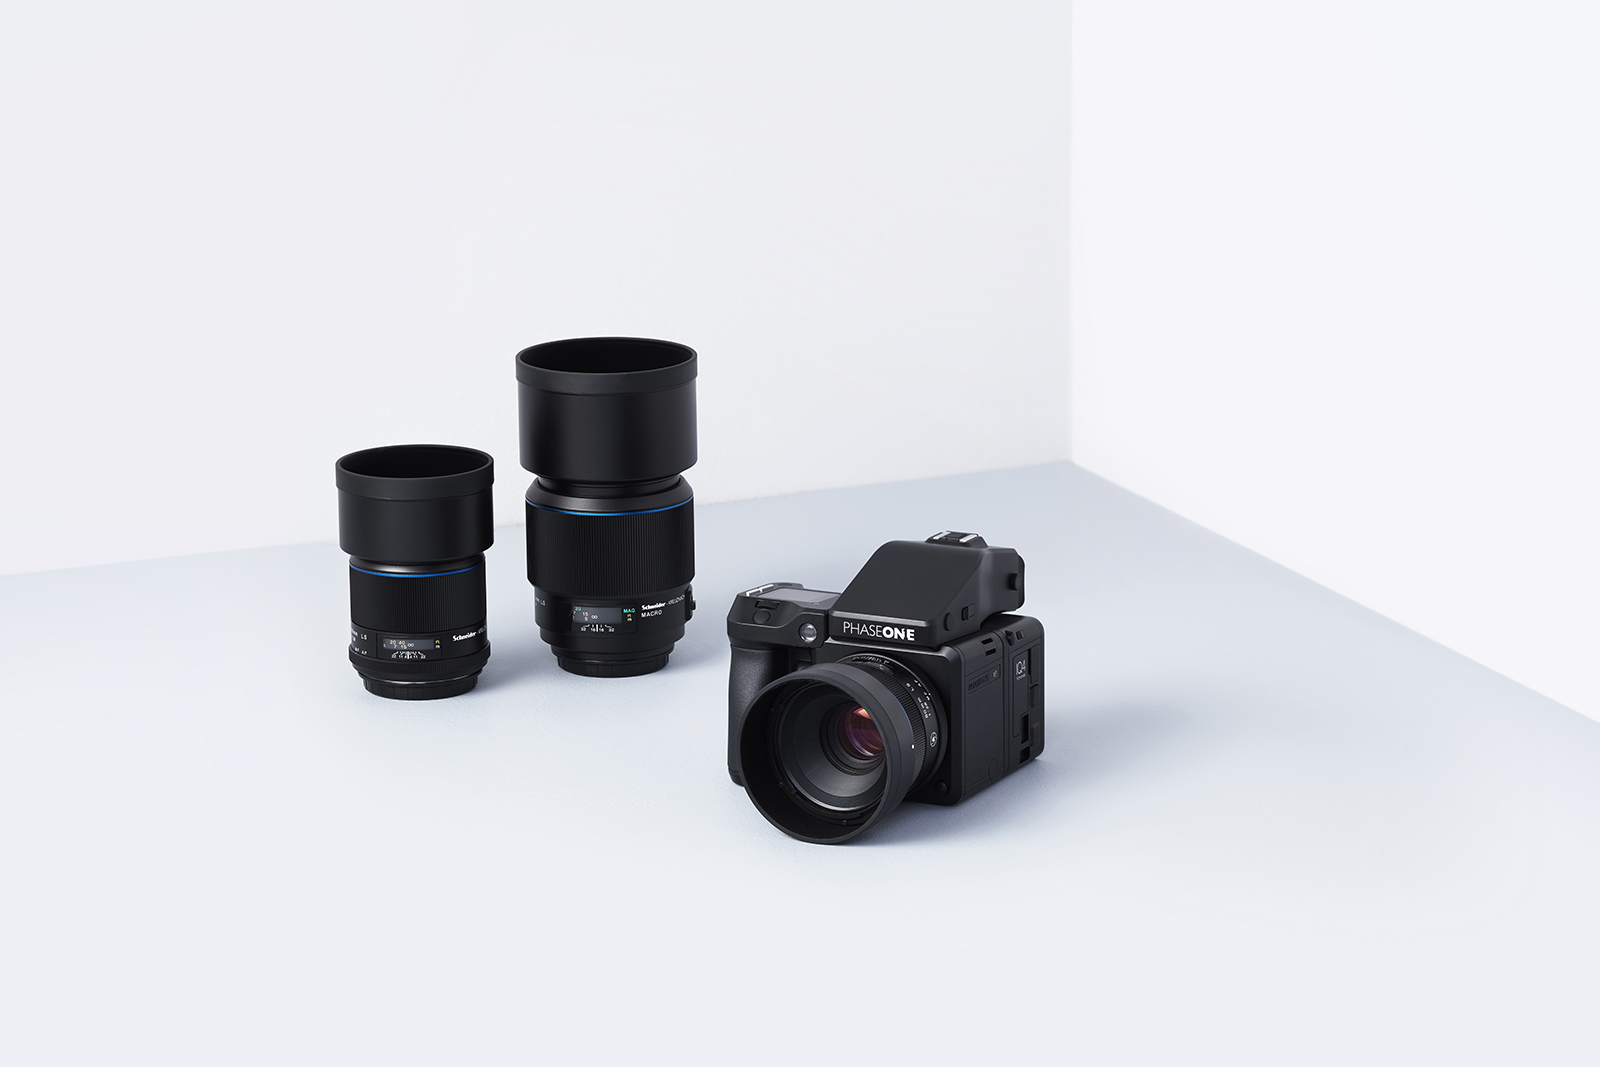 phase one infinity xf announced iq4 100mp trichromatic camera system example kit